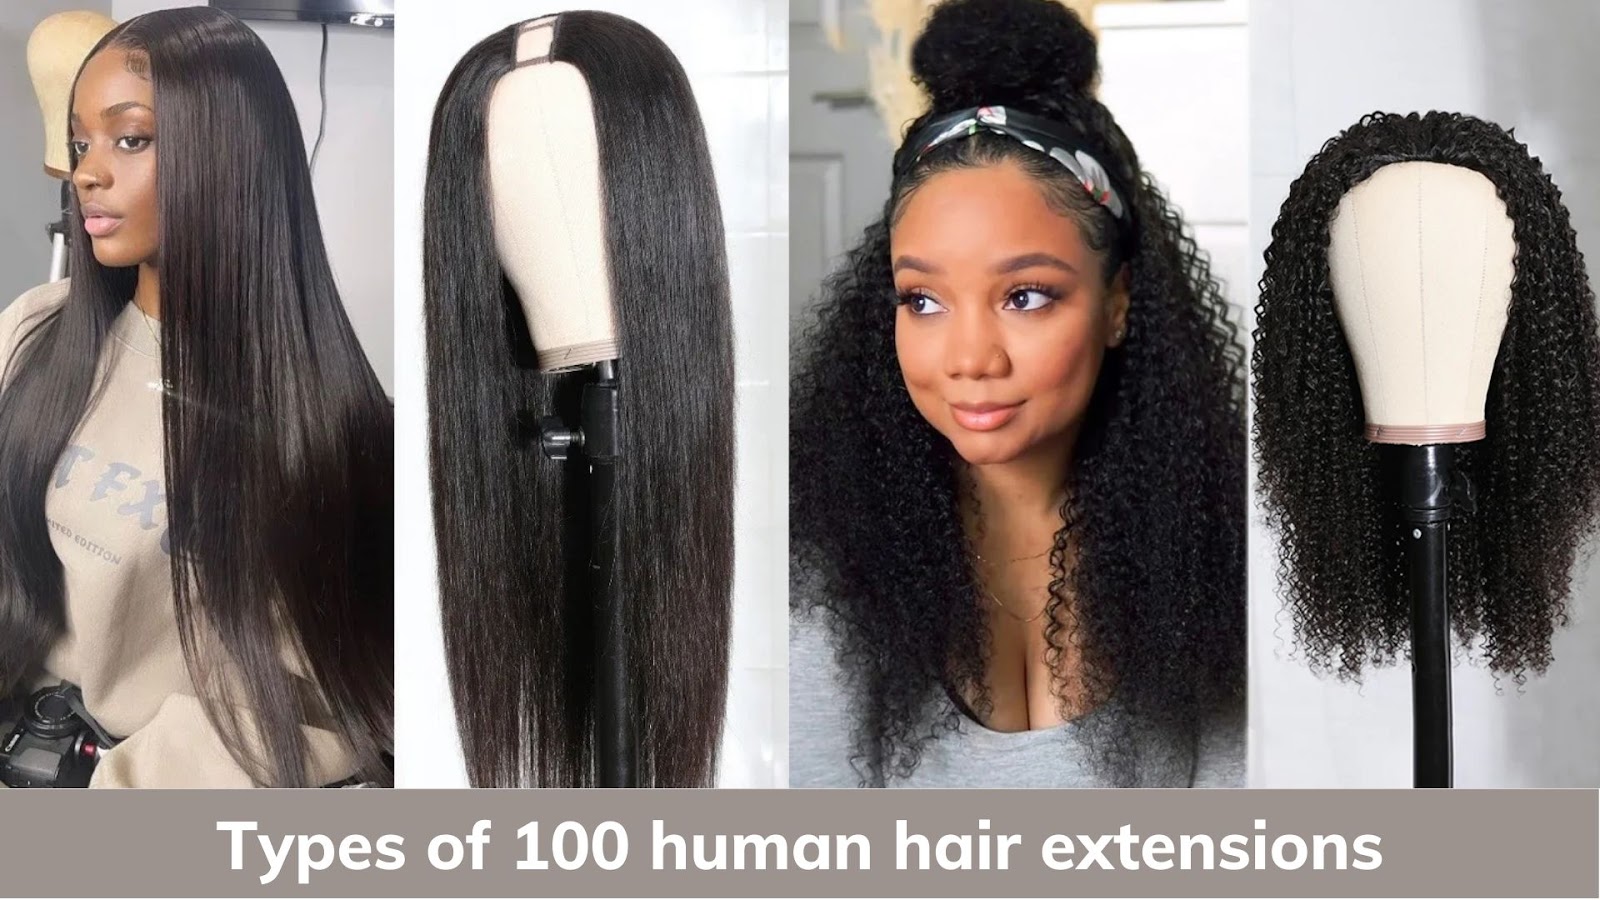 Types of 100 human hair extensions